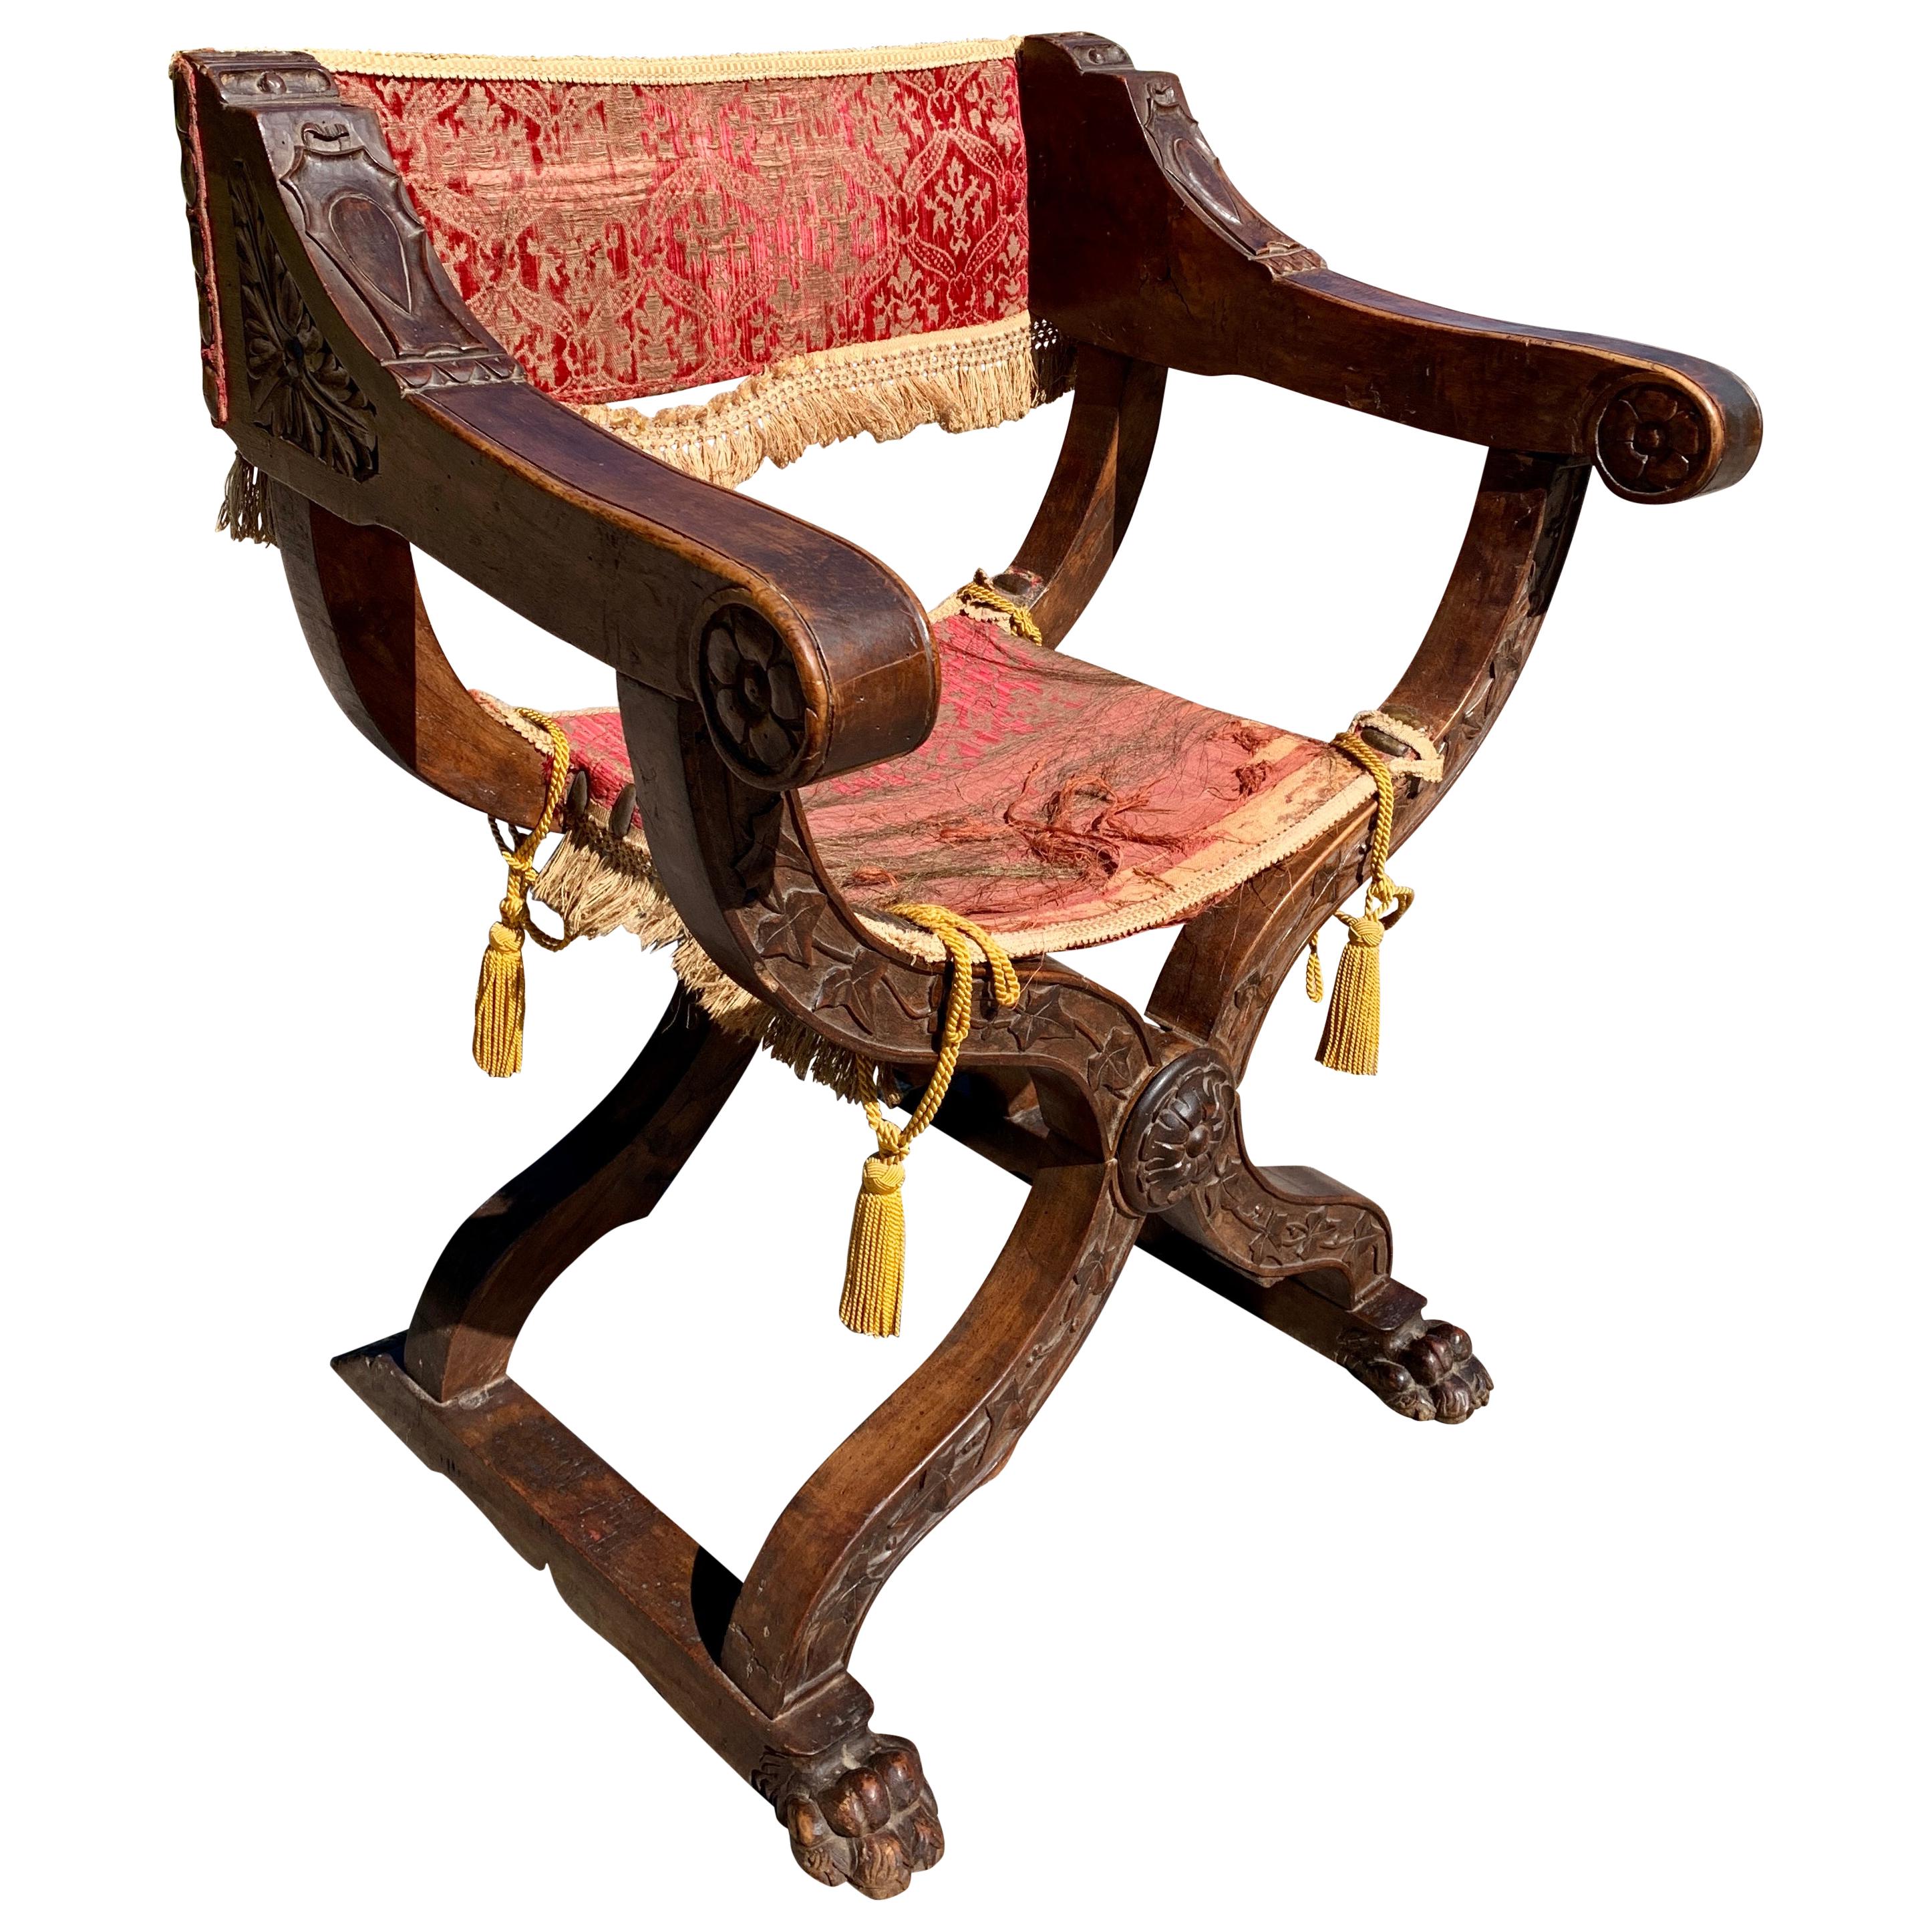 What is the name of the Renaissance stool or simple chair with a wooden back and an octagon-shaped seat?